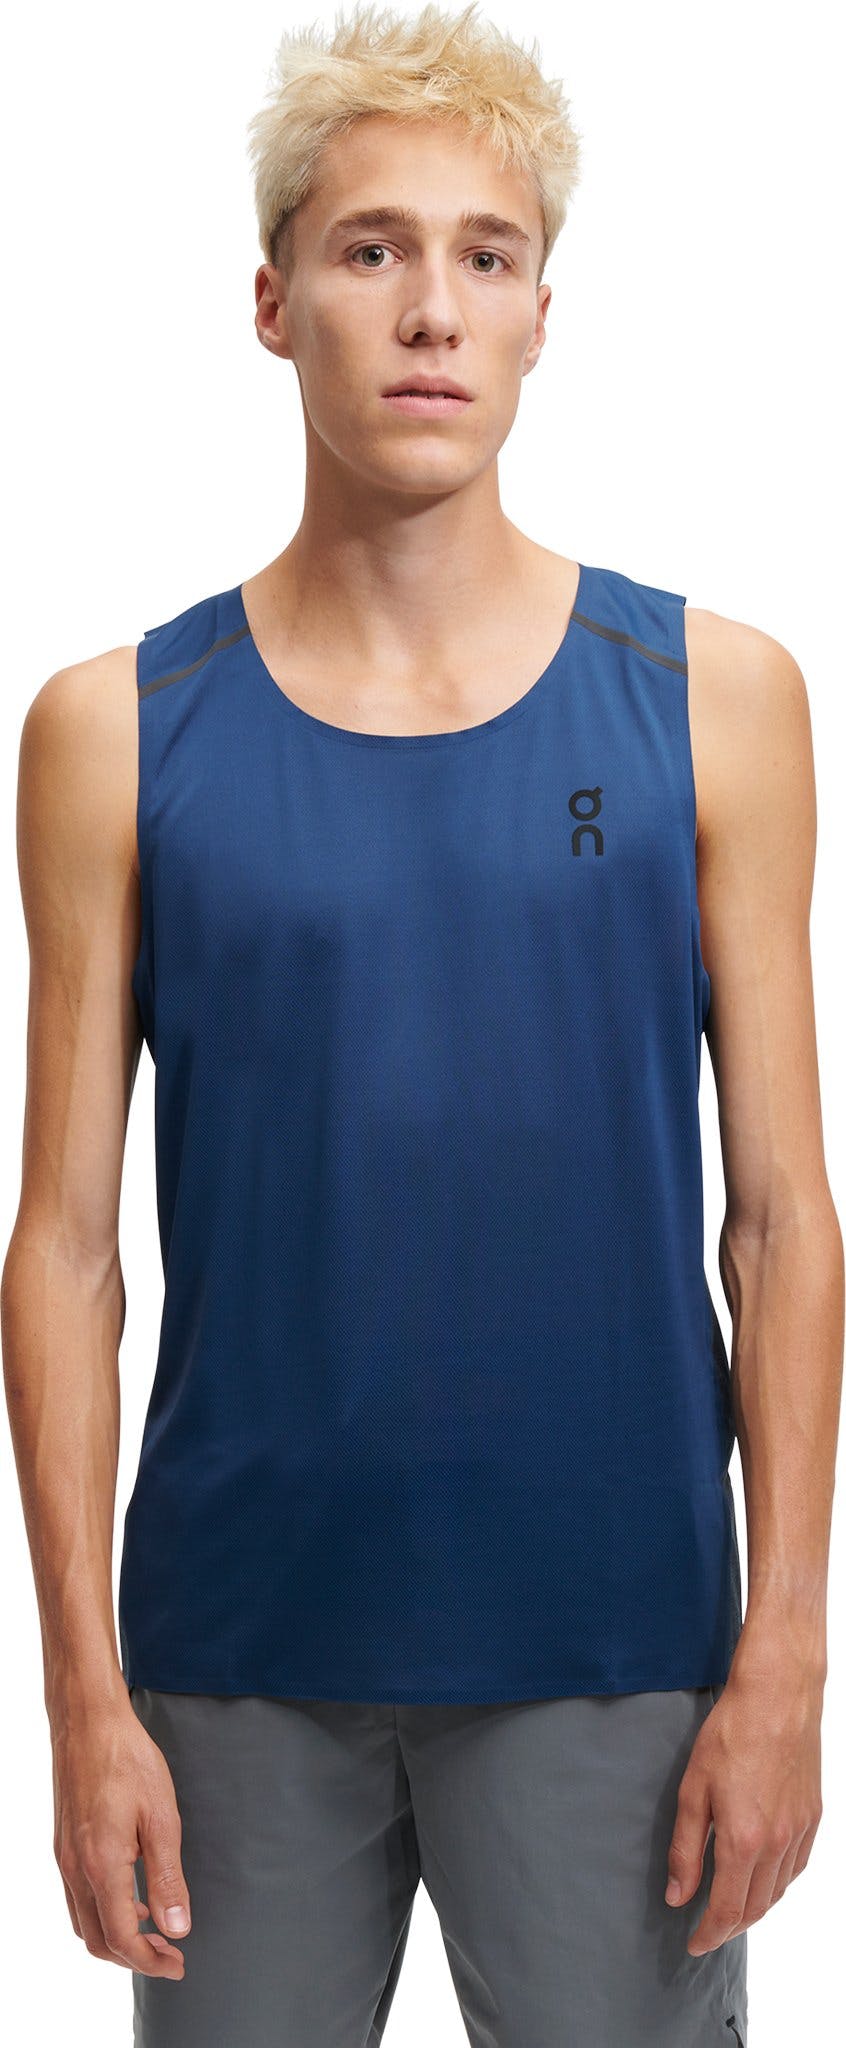 Product image for Tank-T Shirt - Men's